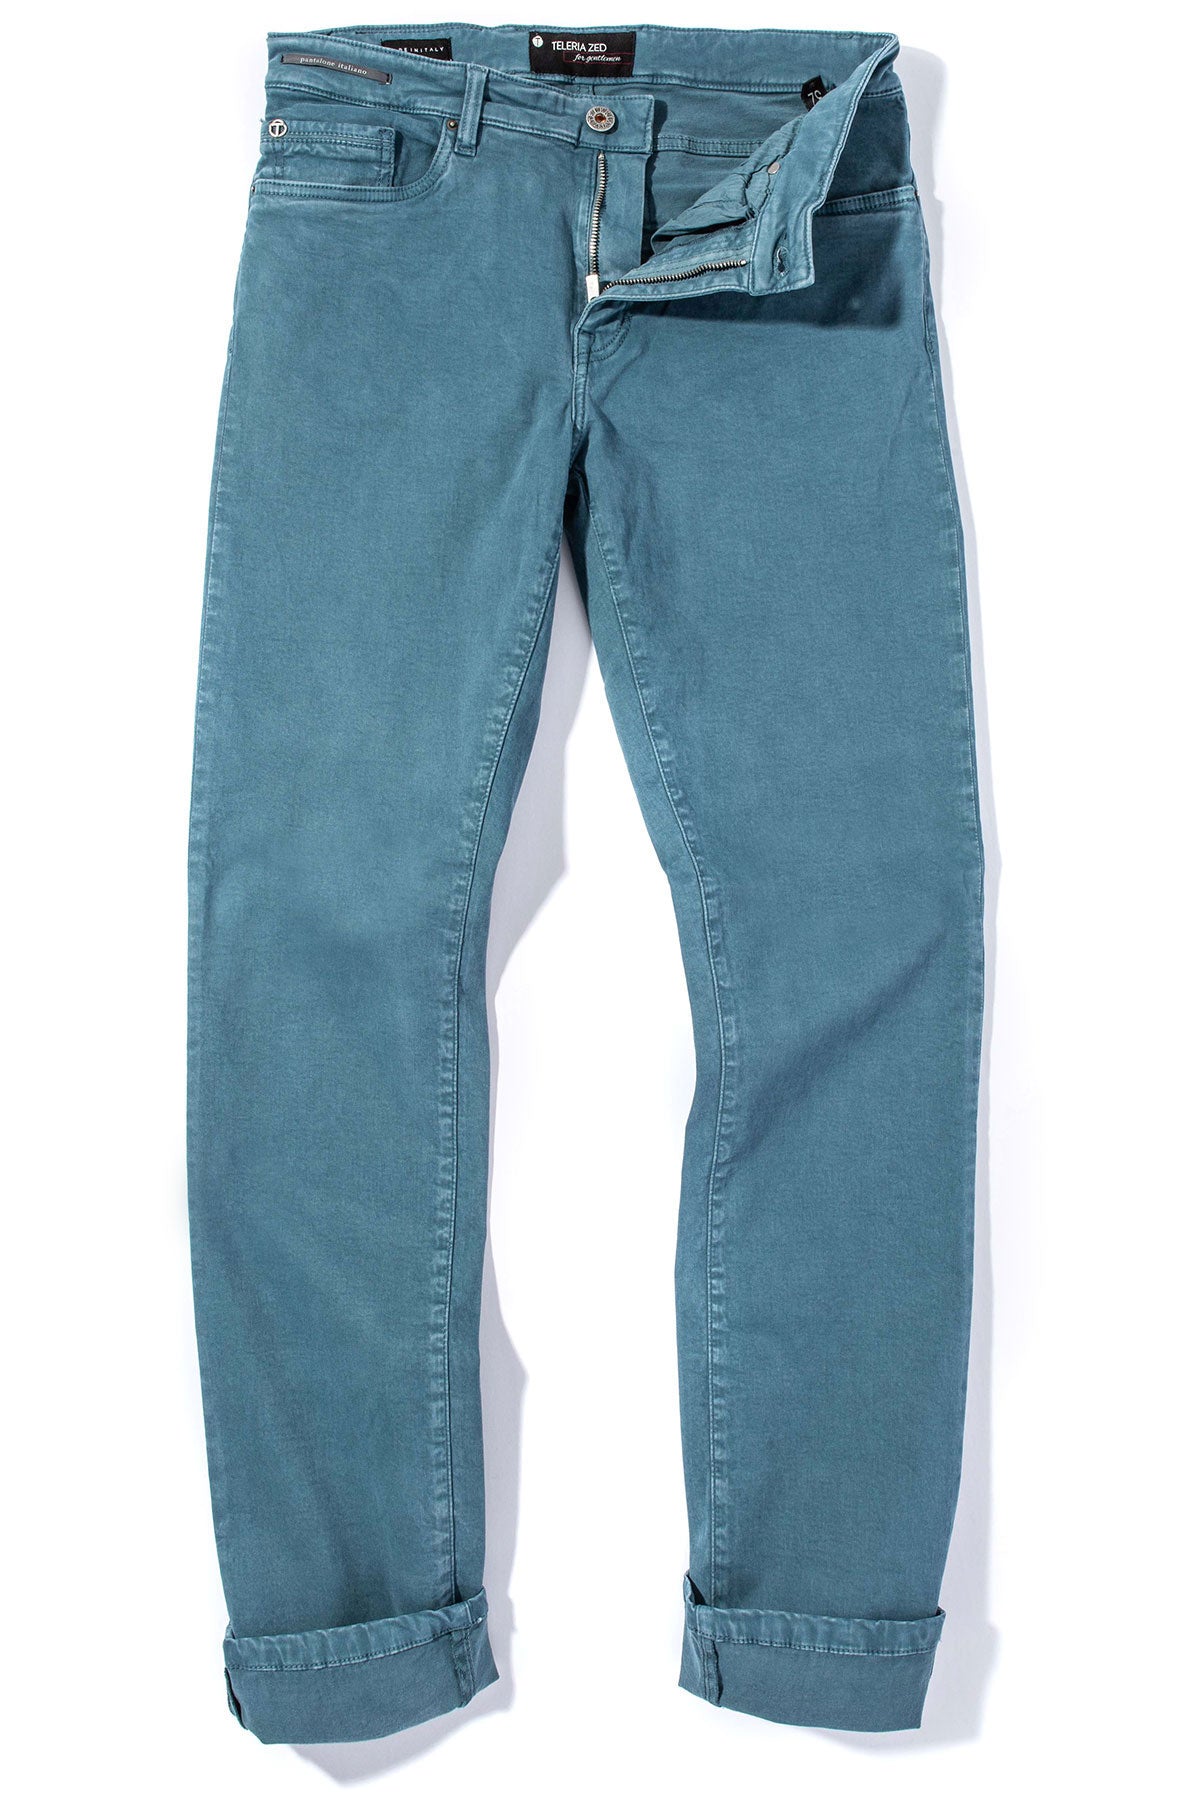 Ryland Rugged Soft Touch Cotton Jeans in Niagra | Mens - Pants - 5 Pocket | Teleria Zed